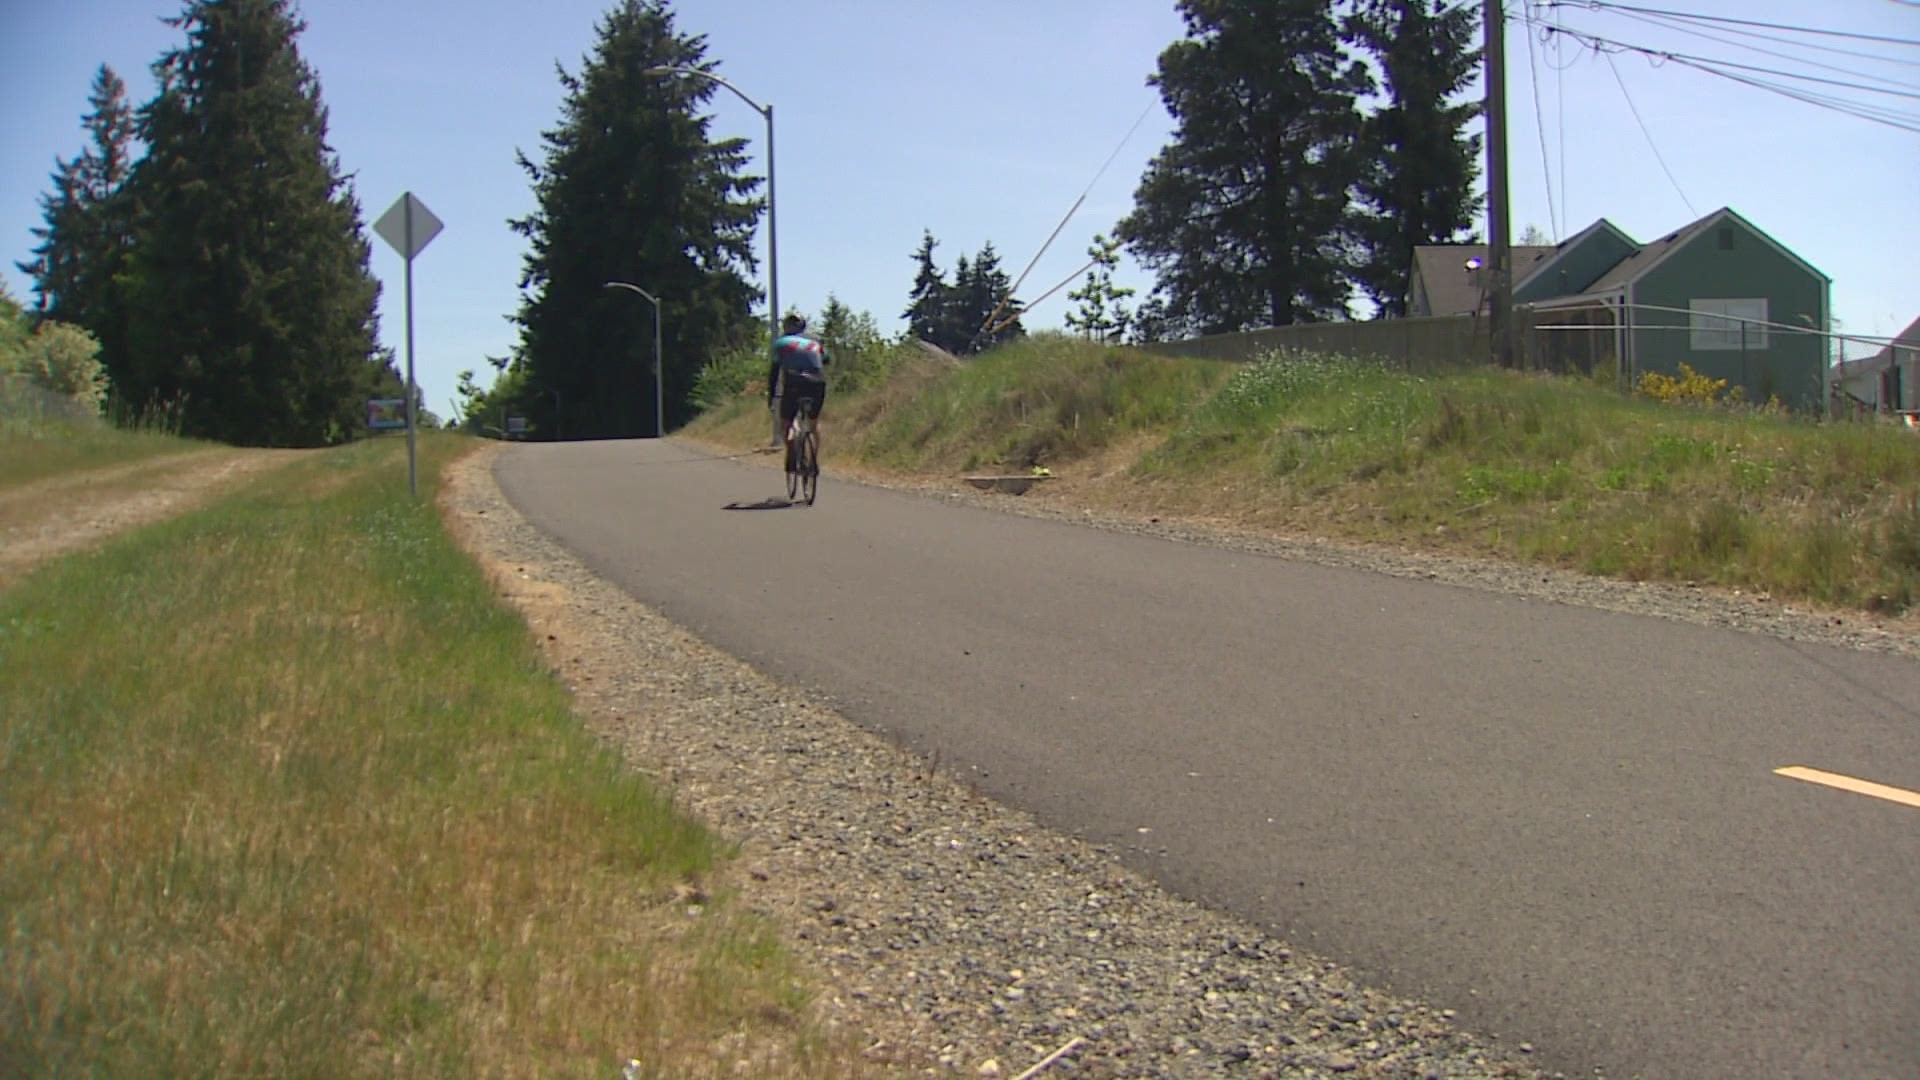 Eastside Tacoma residents say the trail gives them a safe place to bike, run and enjoy the outdoors that many have wanted for years.